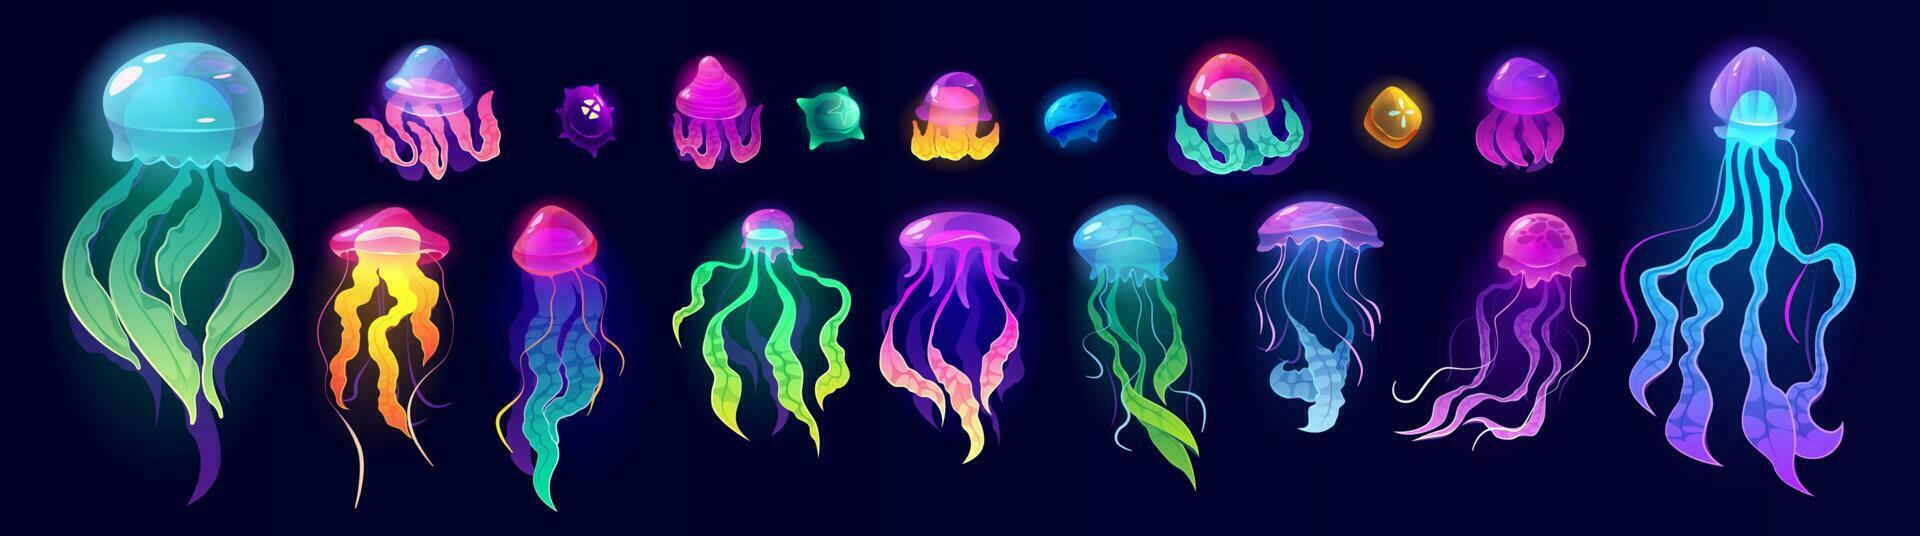 Jellyfish underwater animals, colorful jelly fish vector